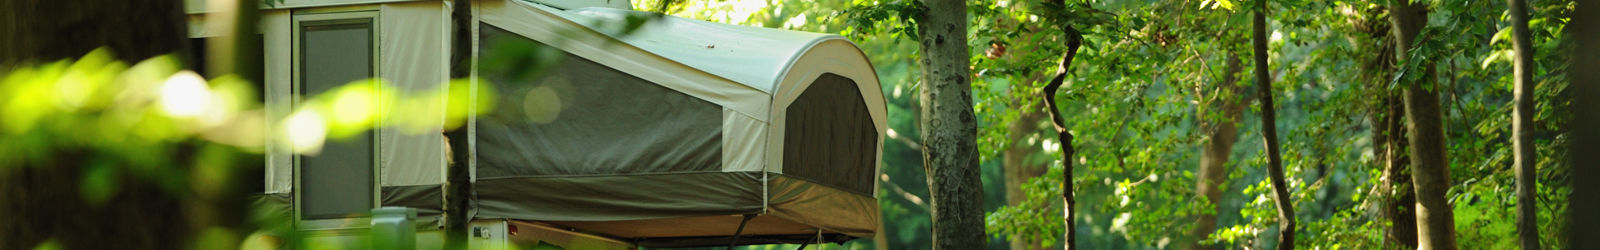 Trailer tent safety